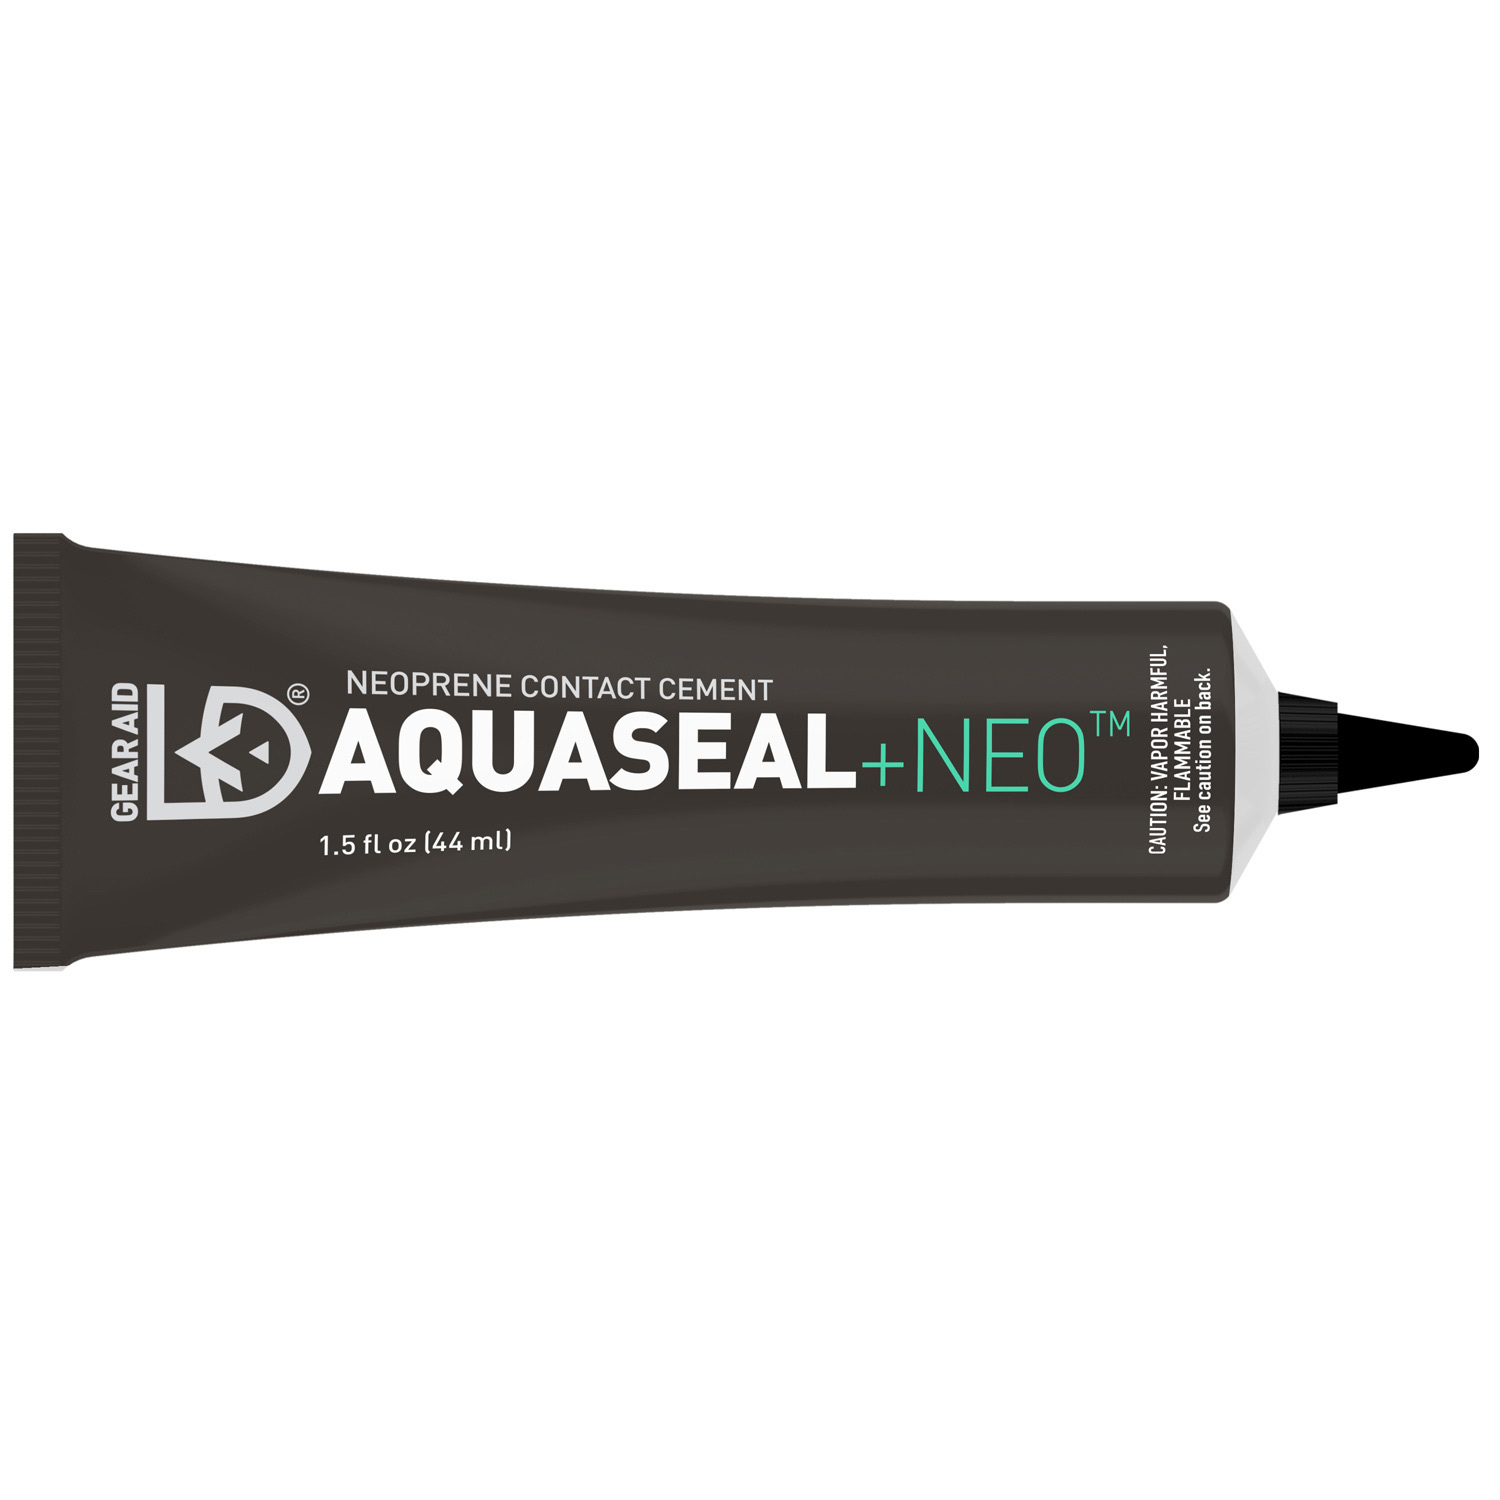 How to Repair a Wetsuit with Gear Aid Aquaseal Repair Adhesive and Gear Aid  Neoprene Patch #surfing 